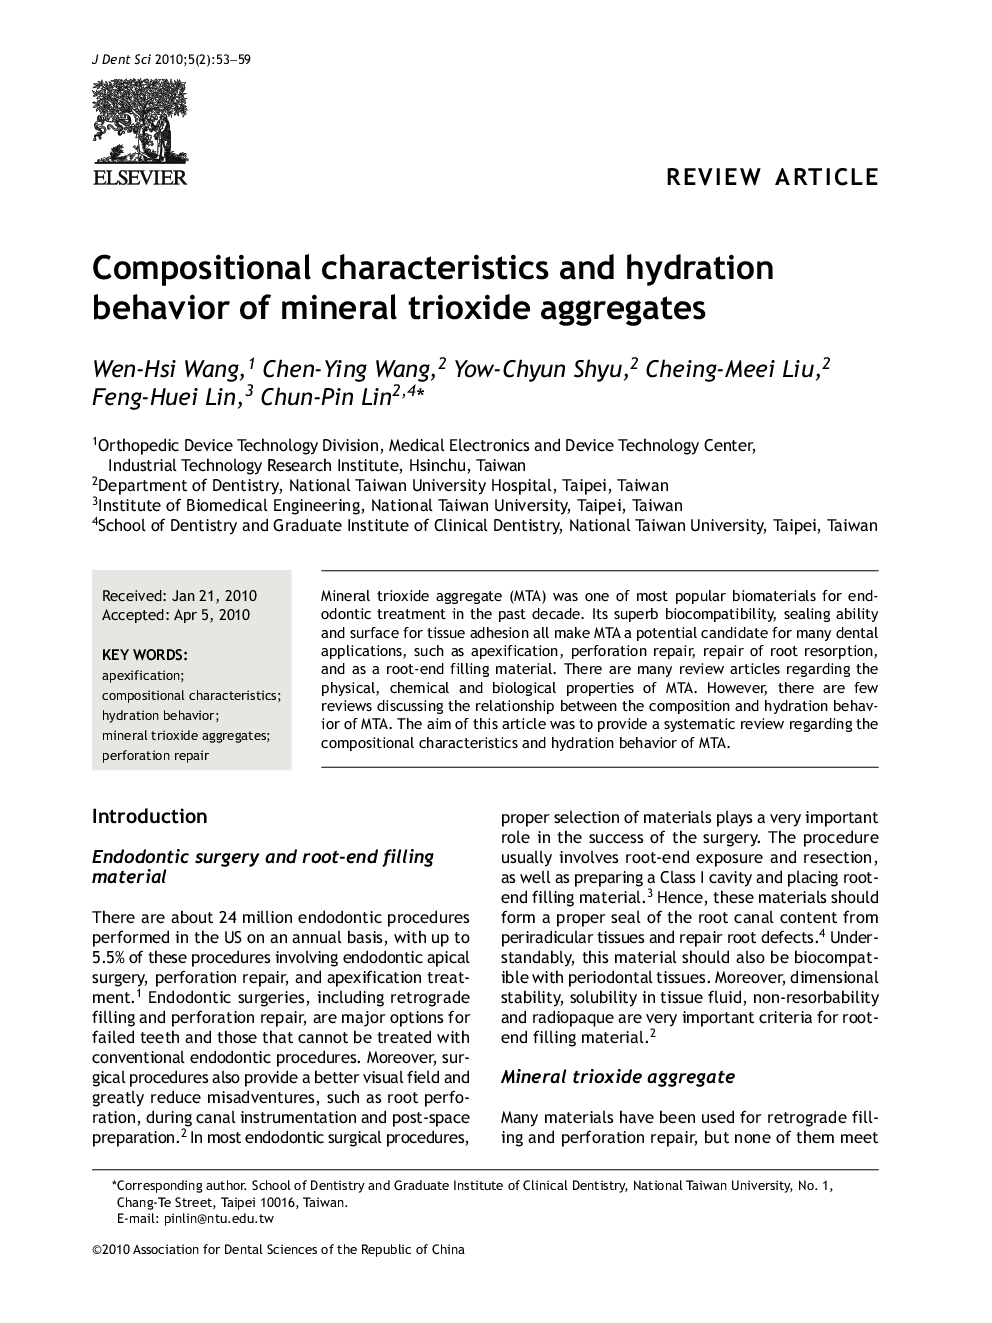 Compositional characteristics and hydration behavior of mineral trioxide aggregates